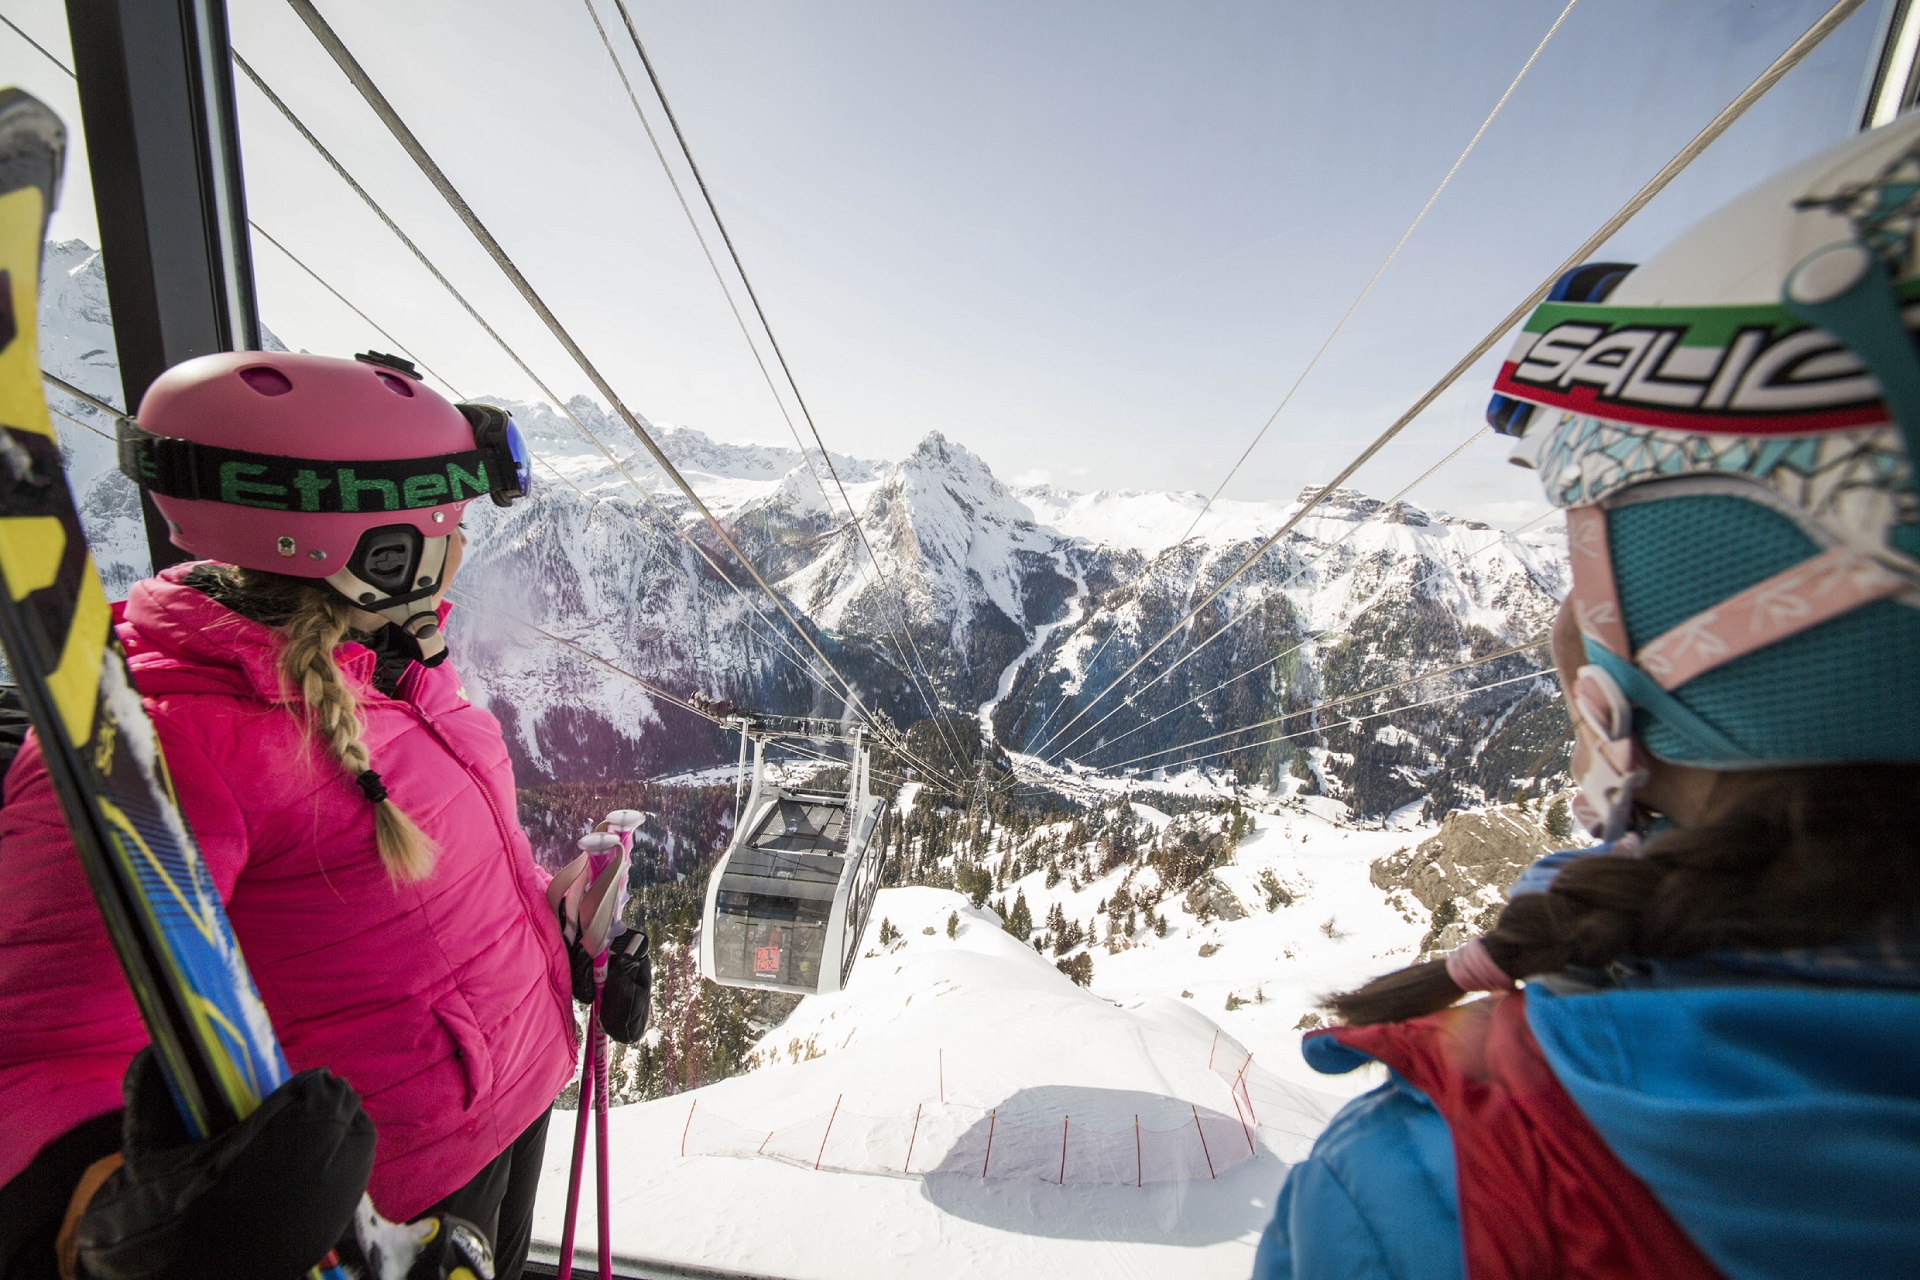 Val di Fassa is waiting for you